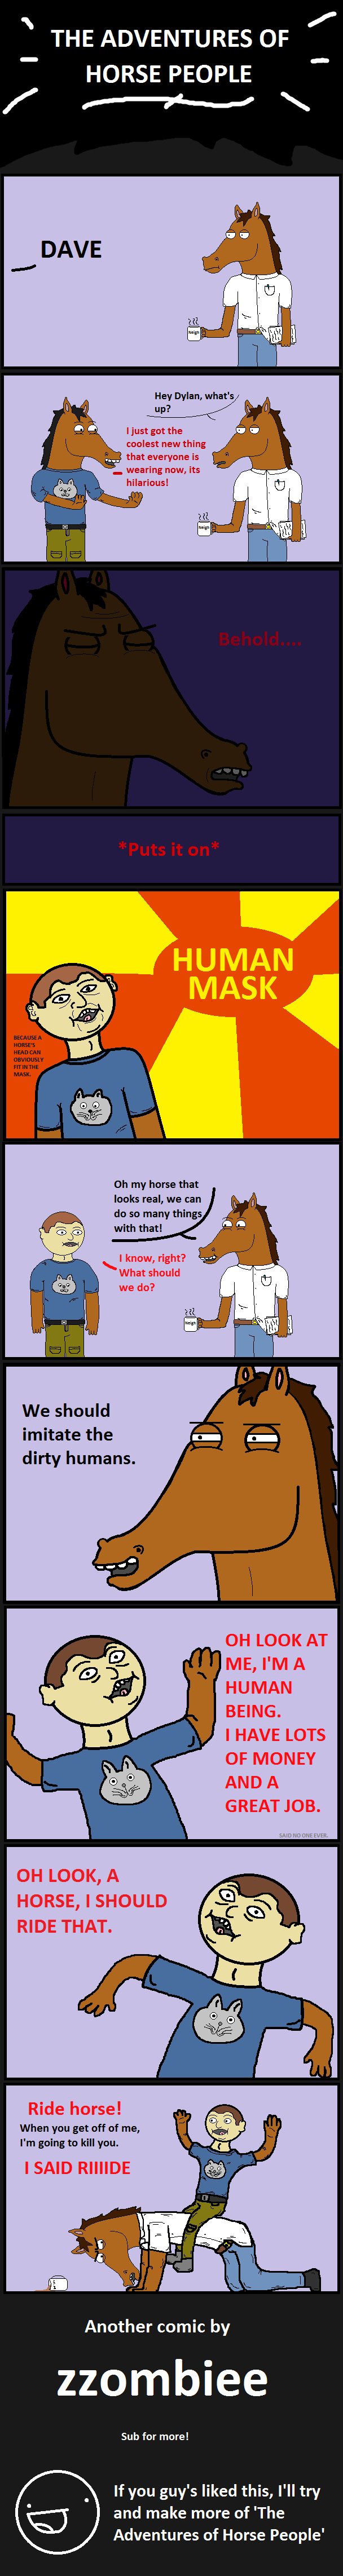 The Adventures of Horse People